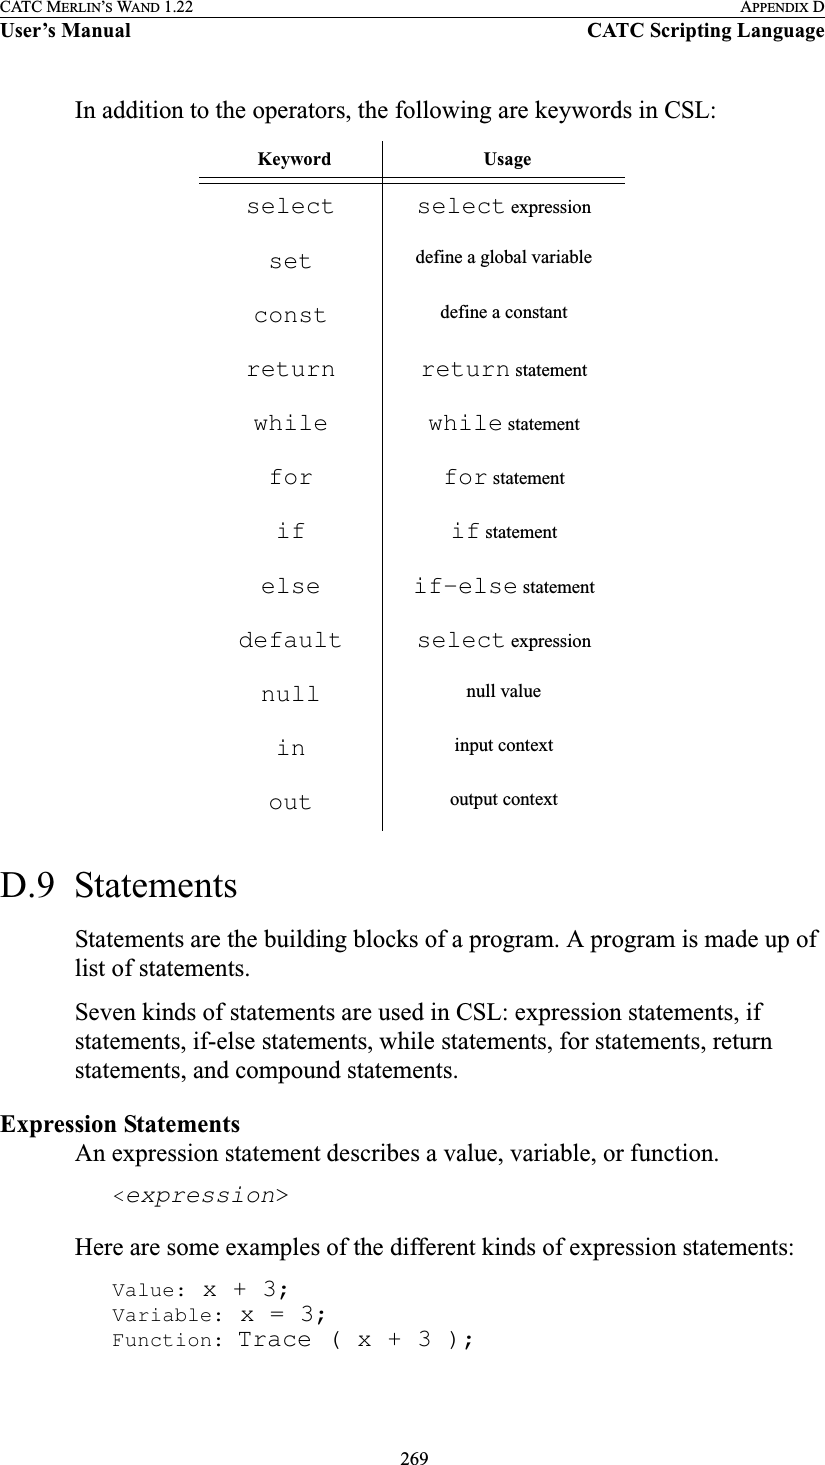  269CATC MERLIN’S WAND 1.22 APPENDIX DUser’s Manual CATC Scripting LanguageIn addition to the operators, the following are keywords in CSL:D.9  StatementsStatements are the building blocks of a program. A program is made up of list of statements.Seven kinds of statements are used in CSL: expression statements, if statements, if-else statements, while statements, for statements, return statements, and compound statements.Expression StatementsAn expression statement describes a value, variable, or function.&lt;expression&gt;Here are some examples of the different kinds of expression statements:Value: x + 3;Variable: x = 3;Function: Trace ( x + 3 );Keyword Usageselect select expressionset define a global variableconst define a constantreturn return statementwhile while statementfor for statementif if statementelse if-else statementdefault select expressionnull null valuein input contextout output context